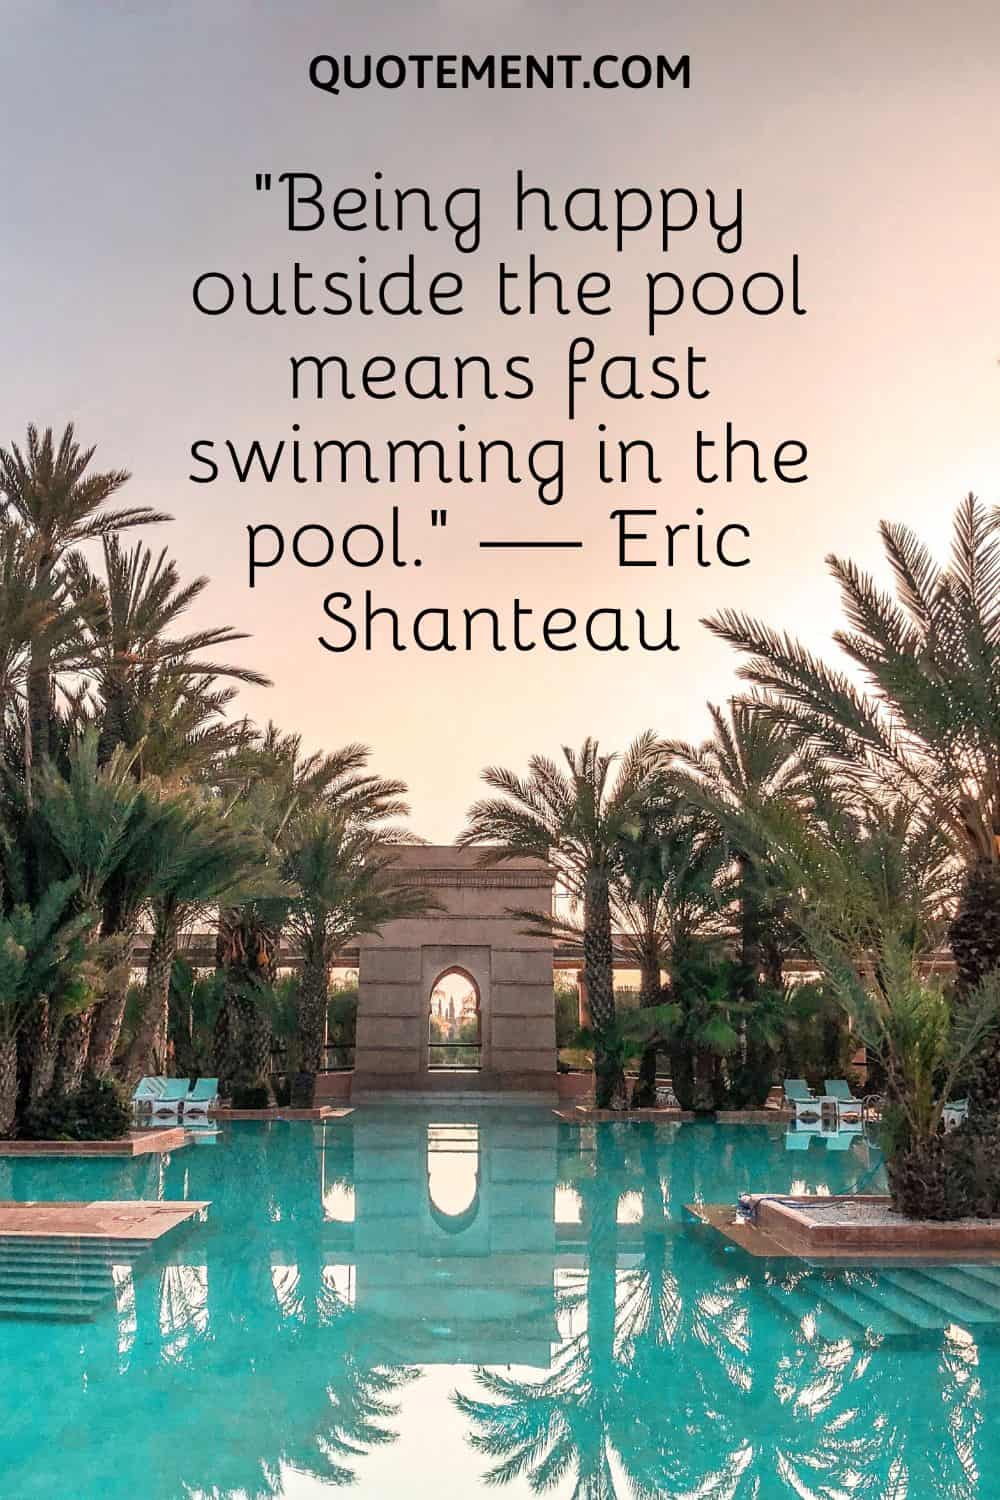 “Being happy outside the pool means fast swimming in the pool.” — Eric Shanteau